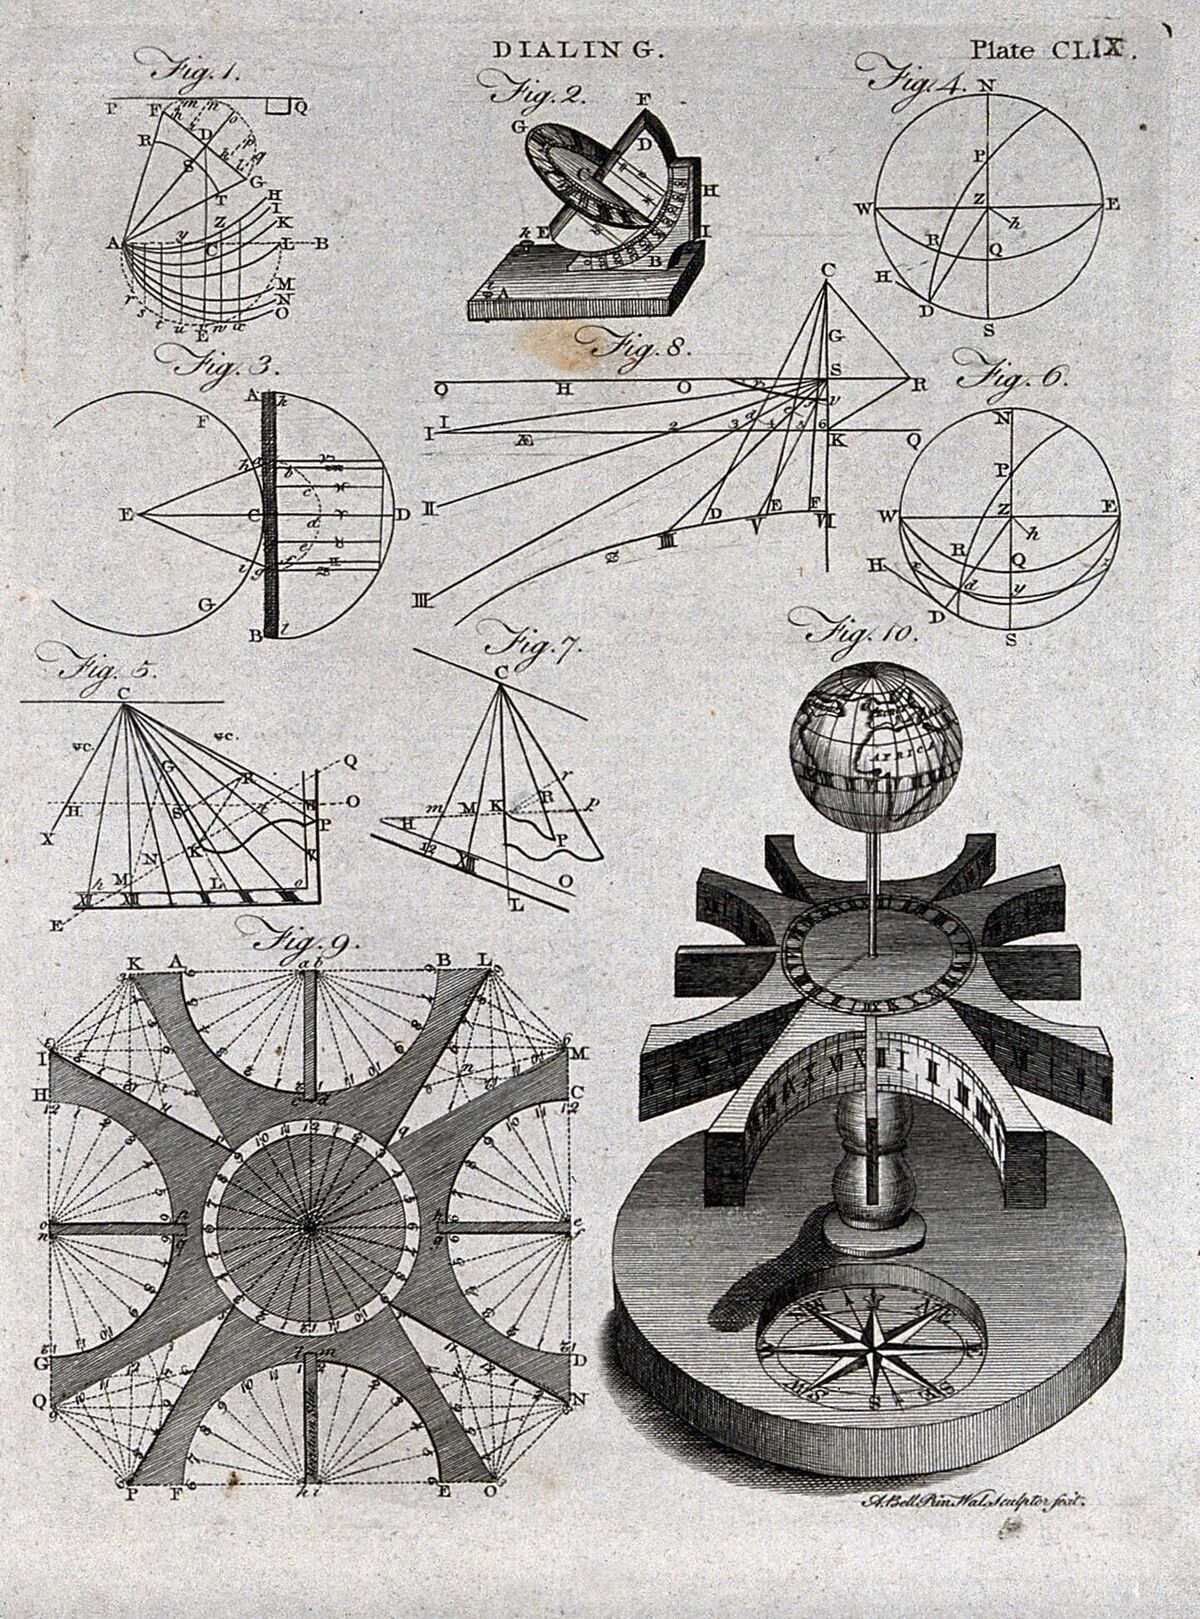 GFD 3/161: Diagrams for setting-out a sundial (engraving by Andrew Bell, 1809)